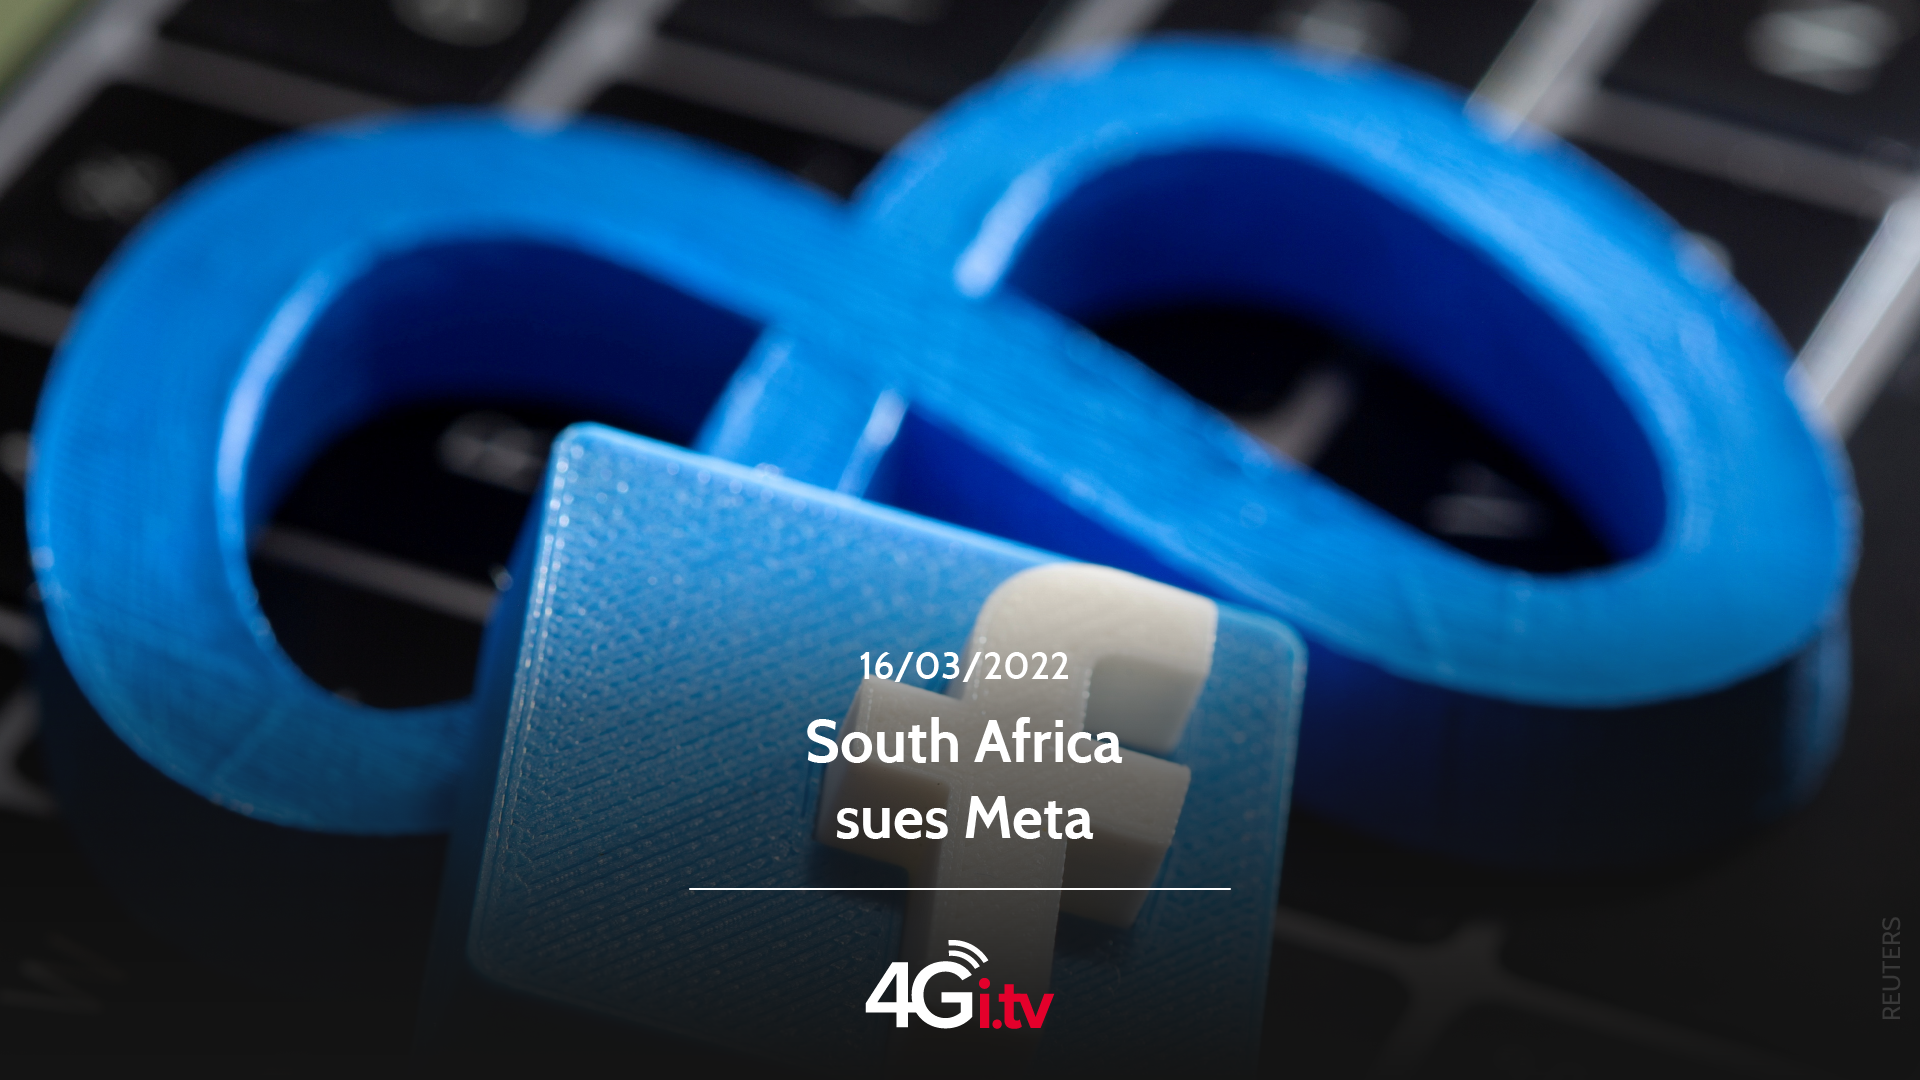 Read more about the article South Africa sues Meta